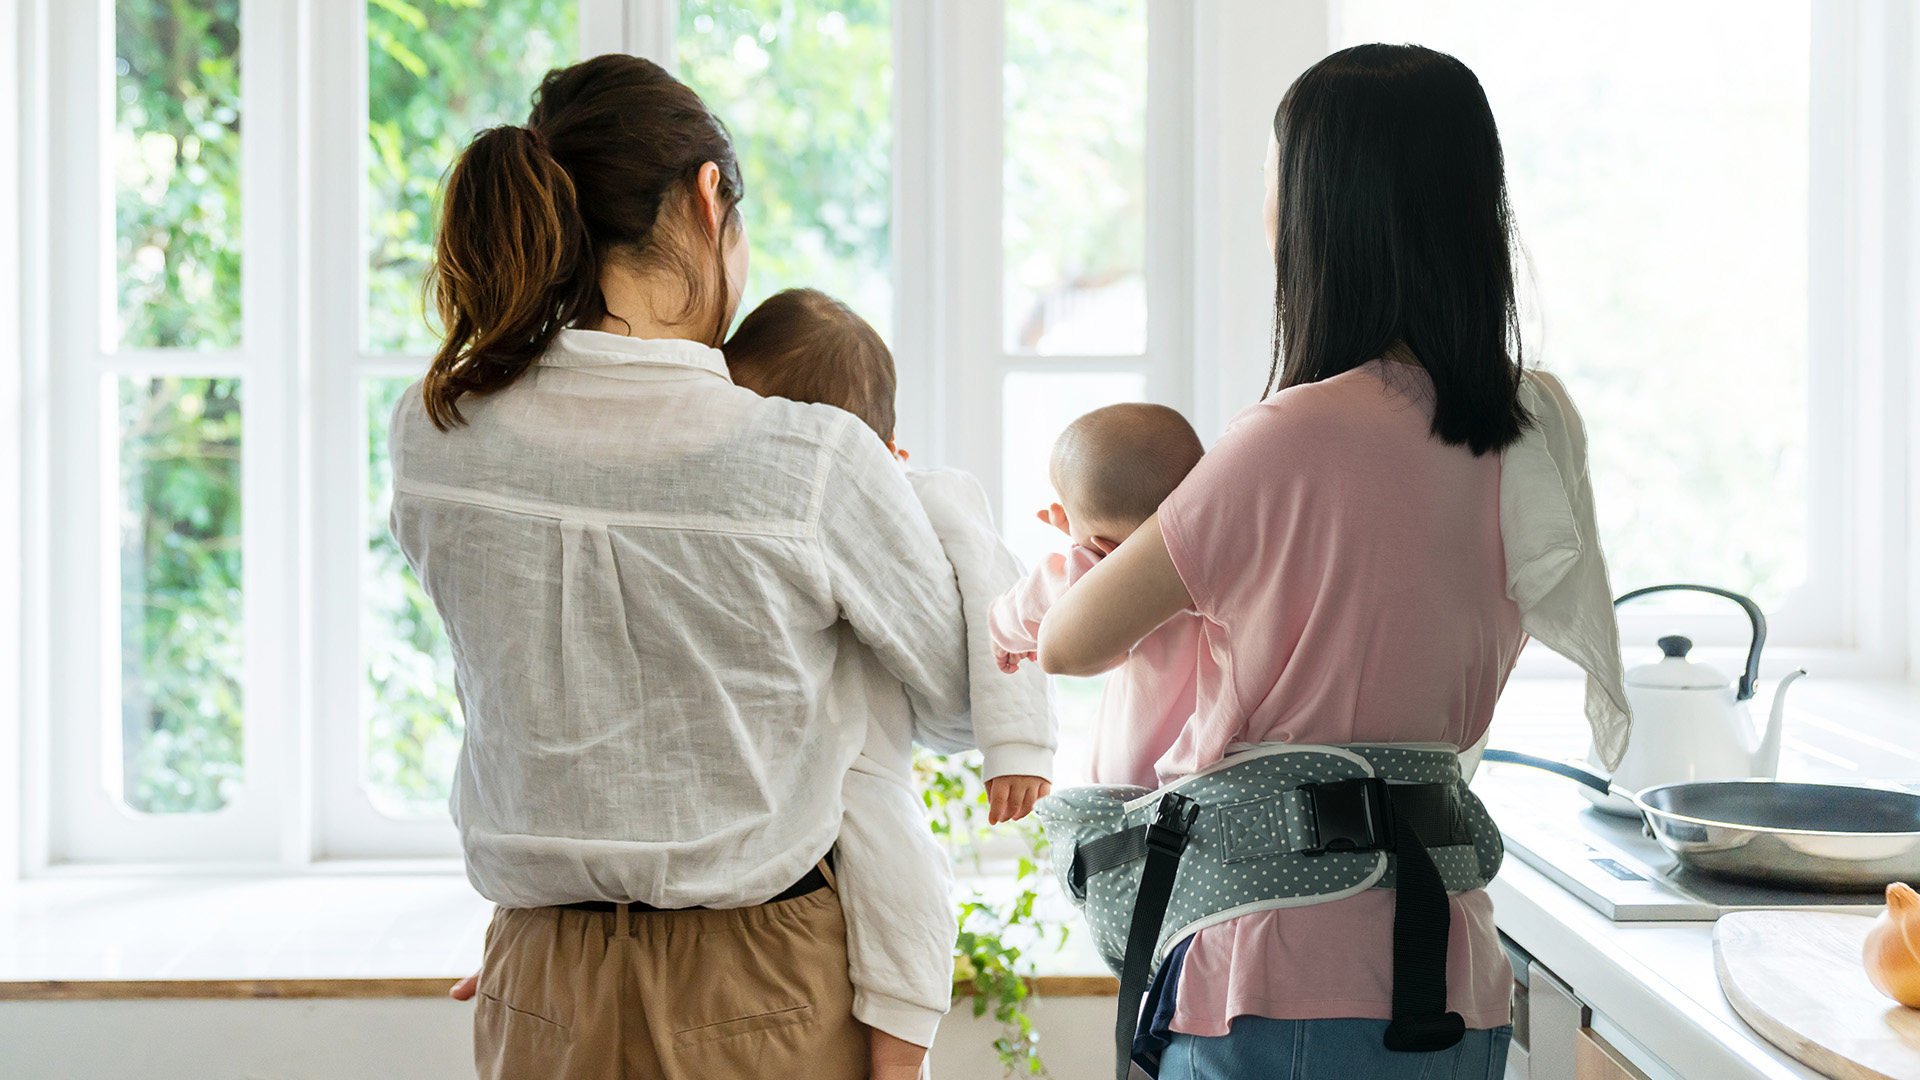 The Post takes a closer look at an emerging trend in China called “divorce pals” which sees recently divorced women team up to share resources and childcare duties. Photo: SCMP composite/Shutterstock